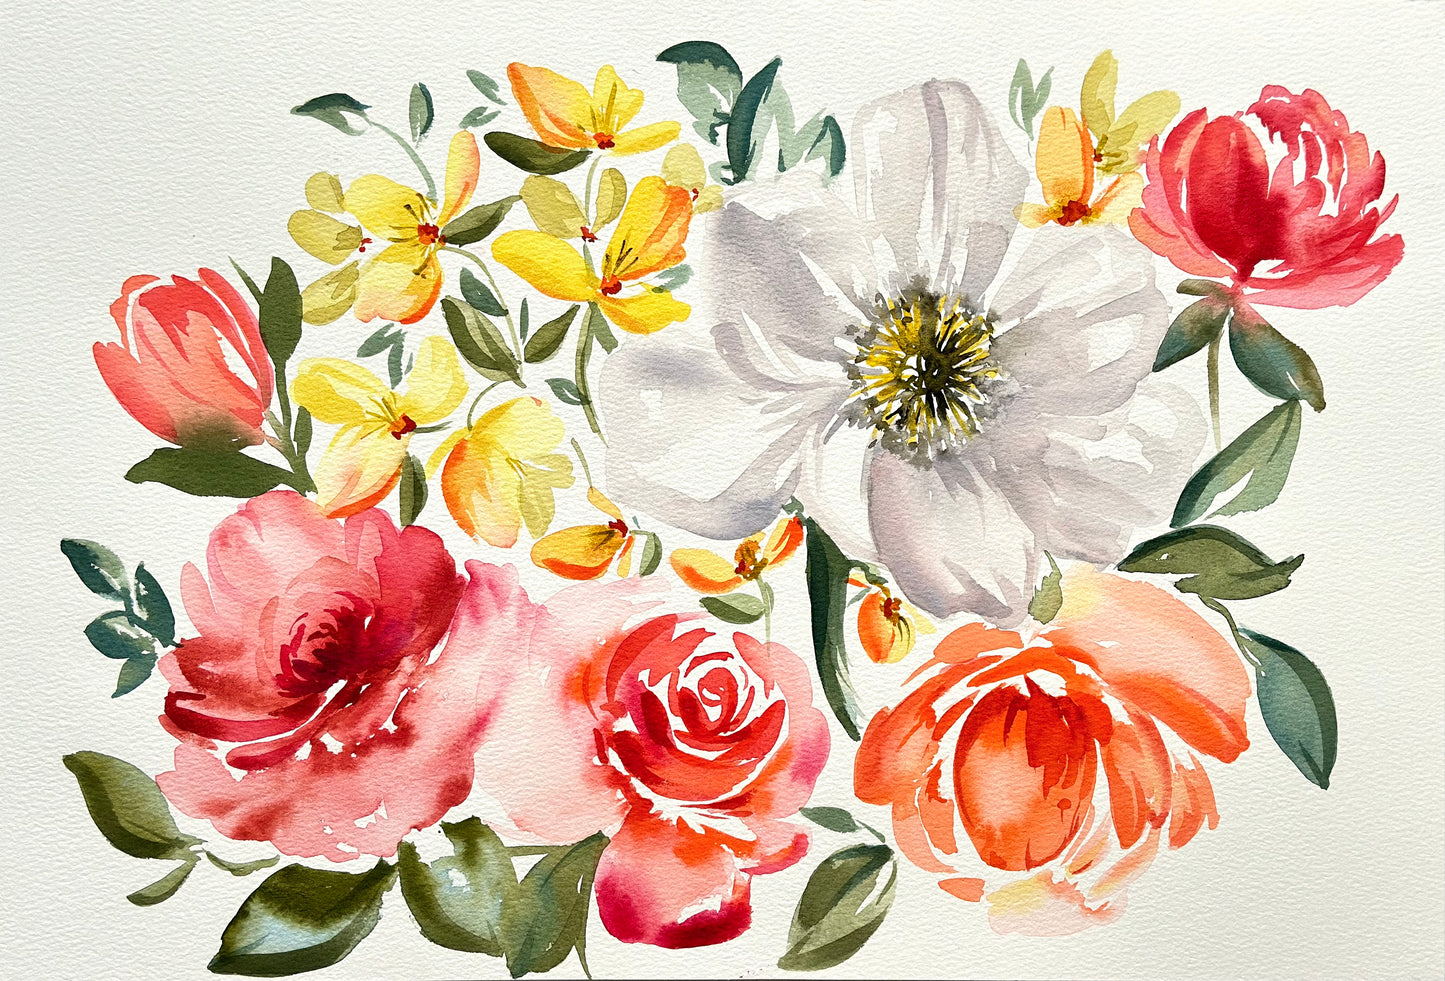 Original Watercolor - White Poppy and Roses